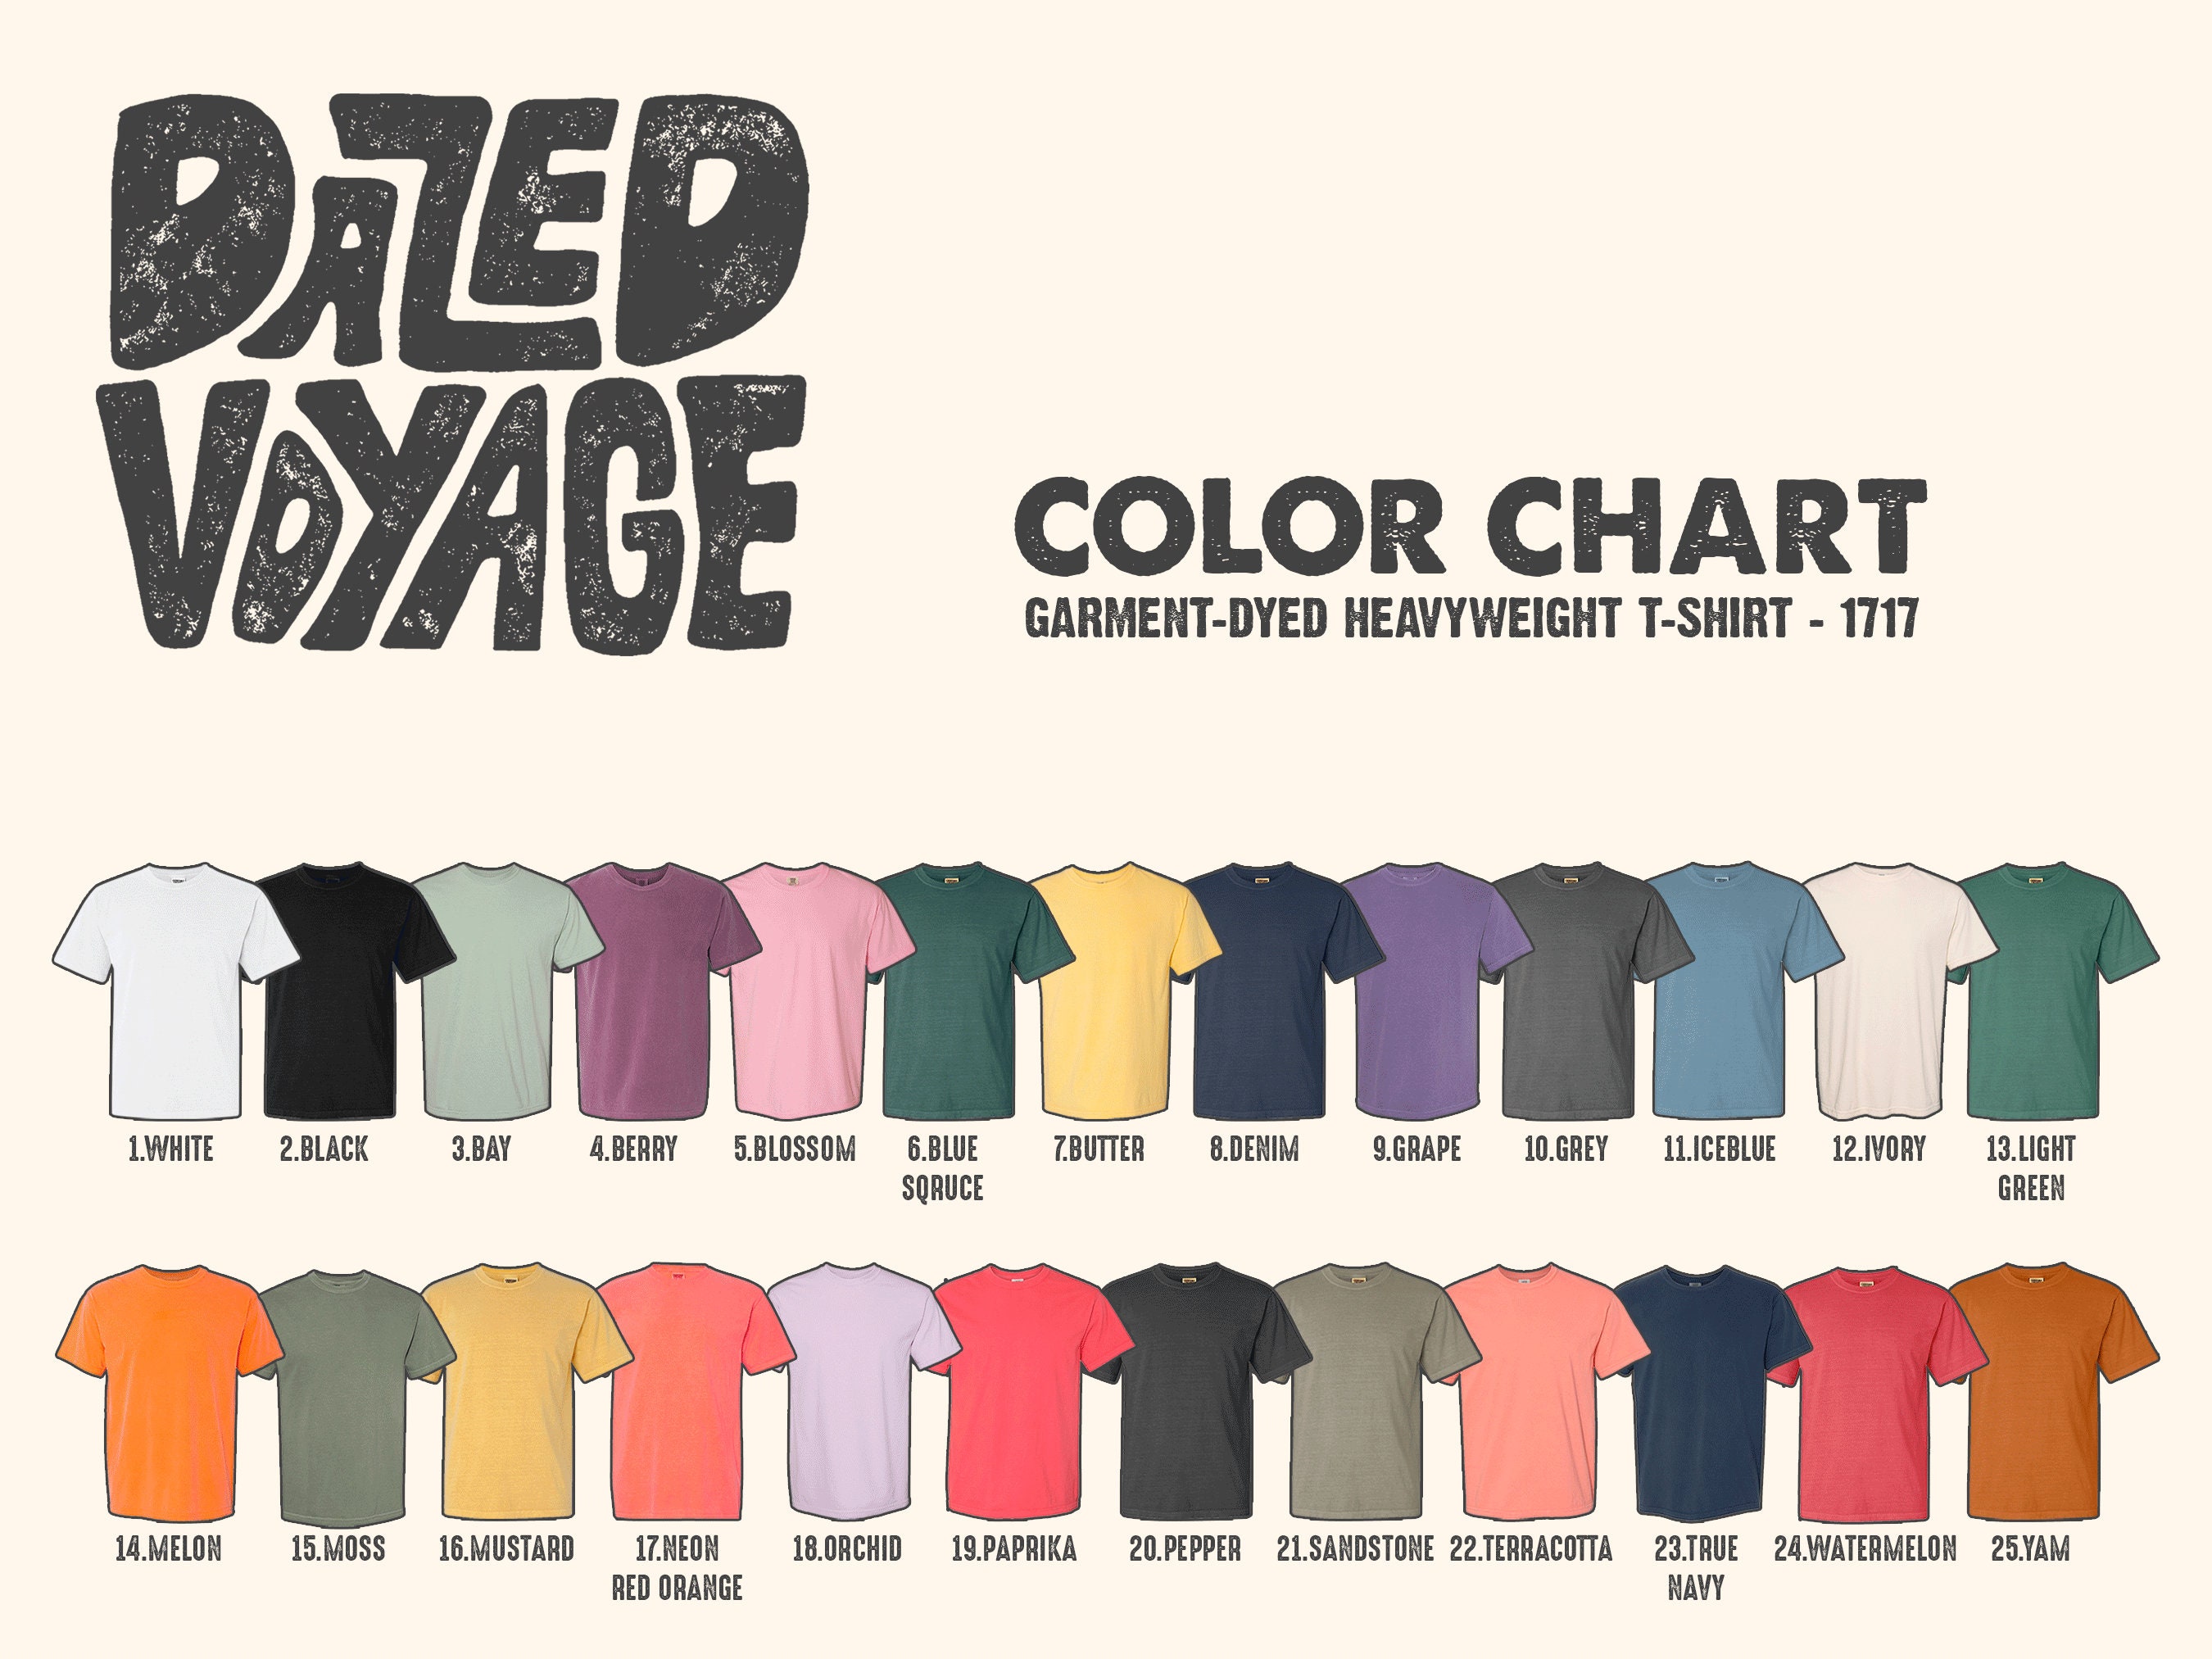 Discover Dazed Voyage Tee, Dazed Voyage T-Shirts, Leopard Tee, Stay Wild T-shits, Vintage Inspired Cotton T-shirt, Unisex Tee, Comfort Colors T-shirt